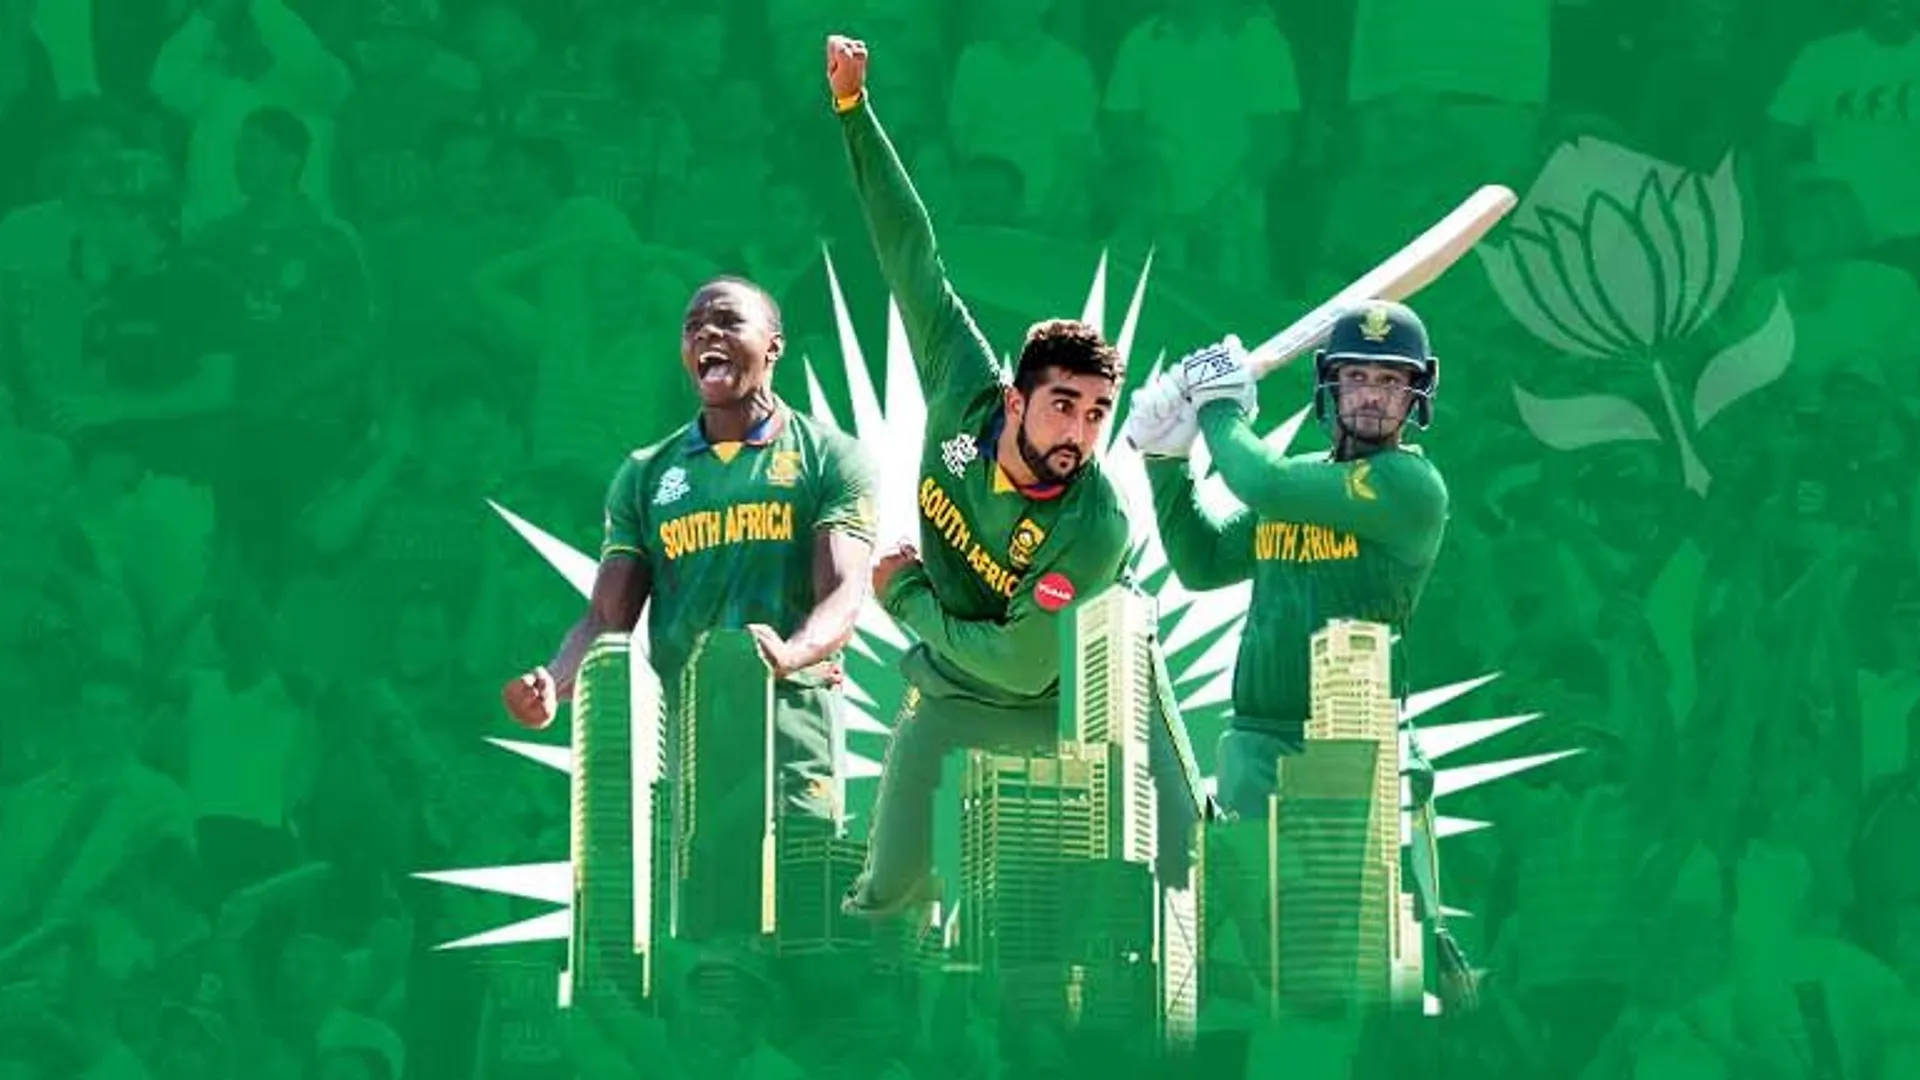 South Africa Cricket Green Poster